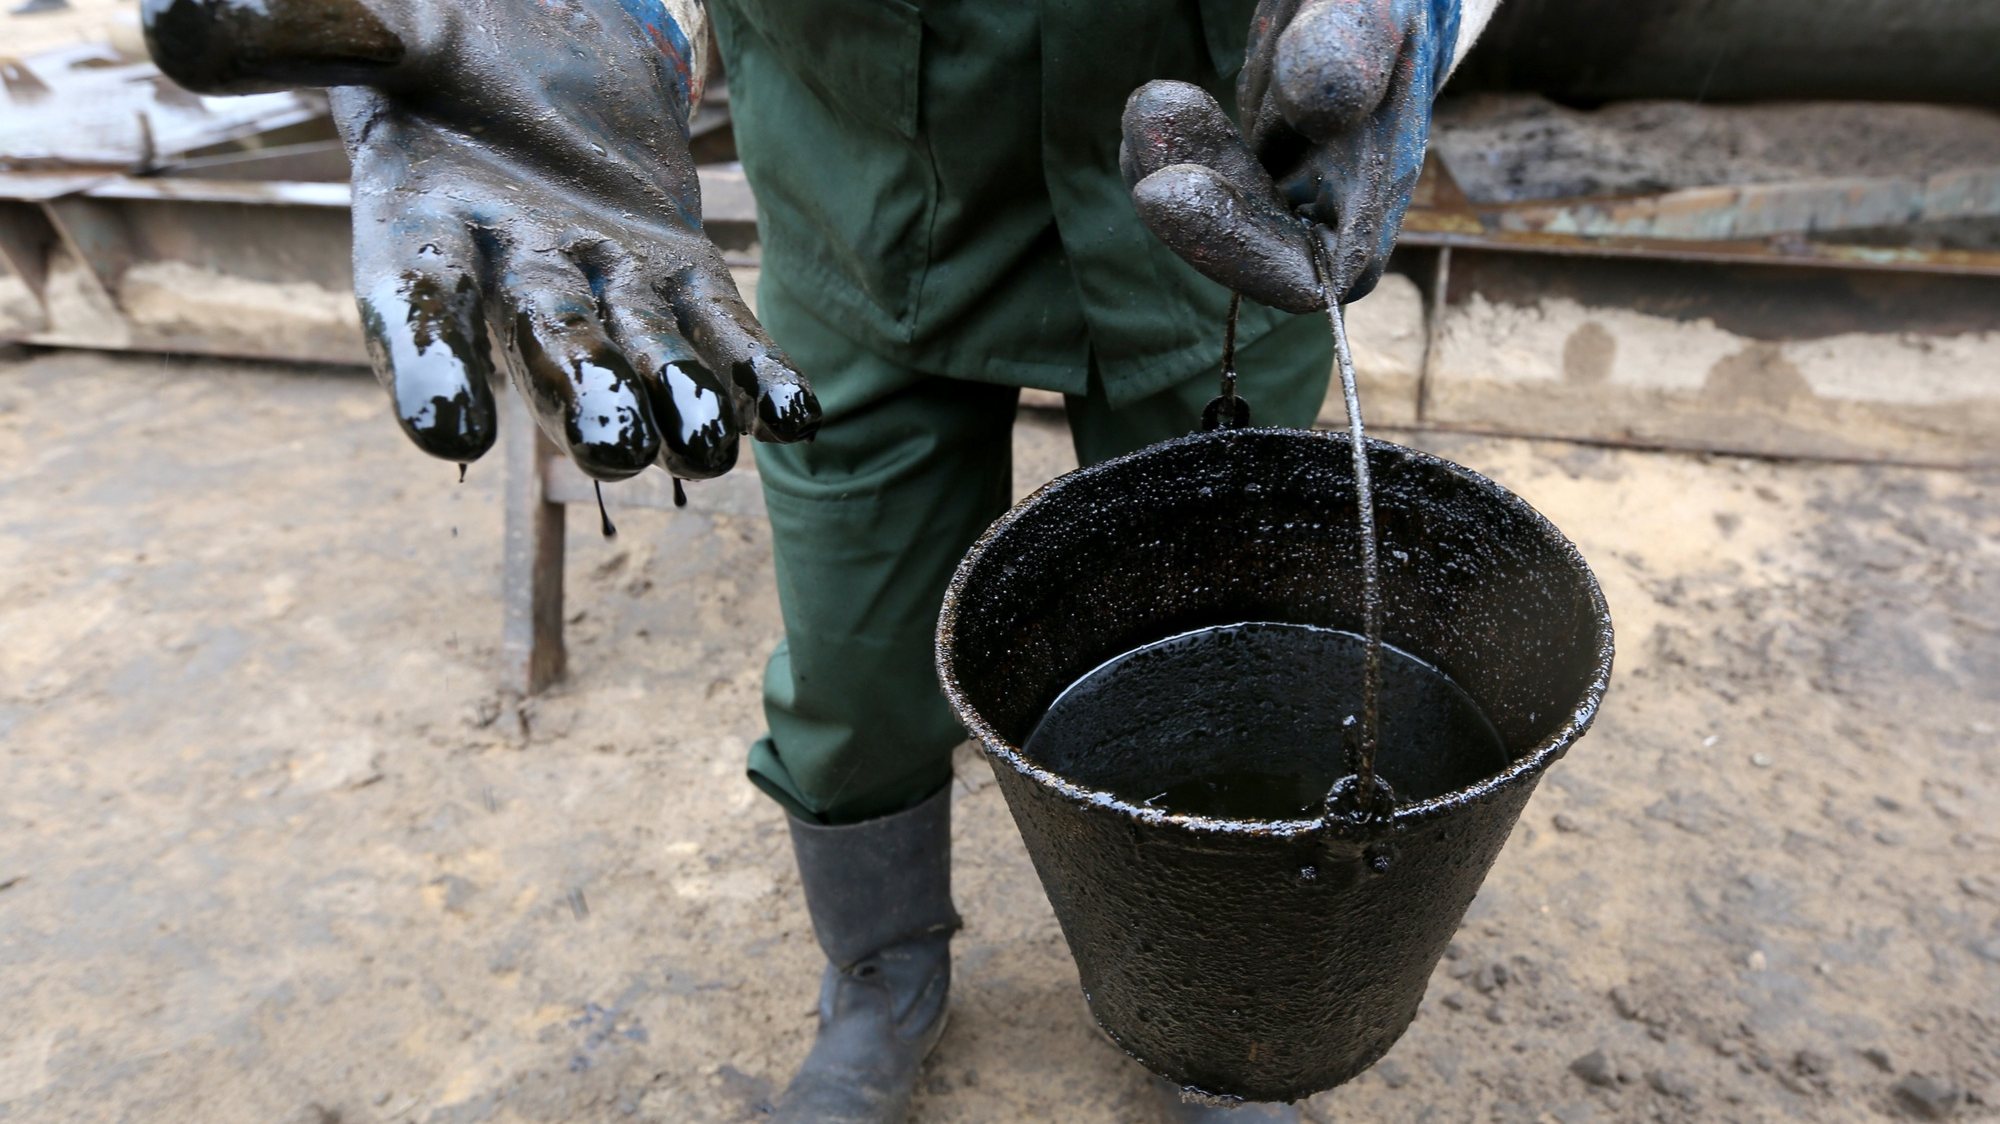 epa05986874 A worker of Belarusian scientific production center of geology shows a newly extracted Belarusian mineral oil at the reconnaissance oil well near the village of Dobrogoshcha, some 210 km from Minsk, Belarus, 24 May 2017. Belarus continues to conduct oil exploration on its territory.  EPA/TATYANA ZENKOVICH